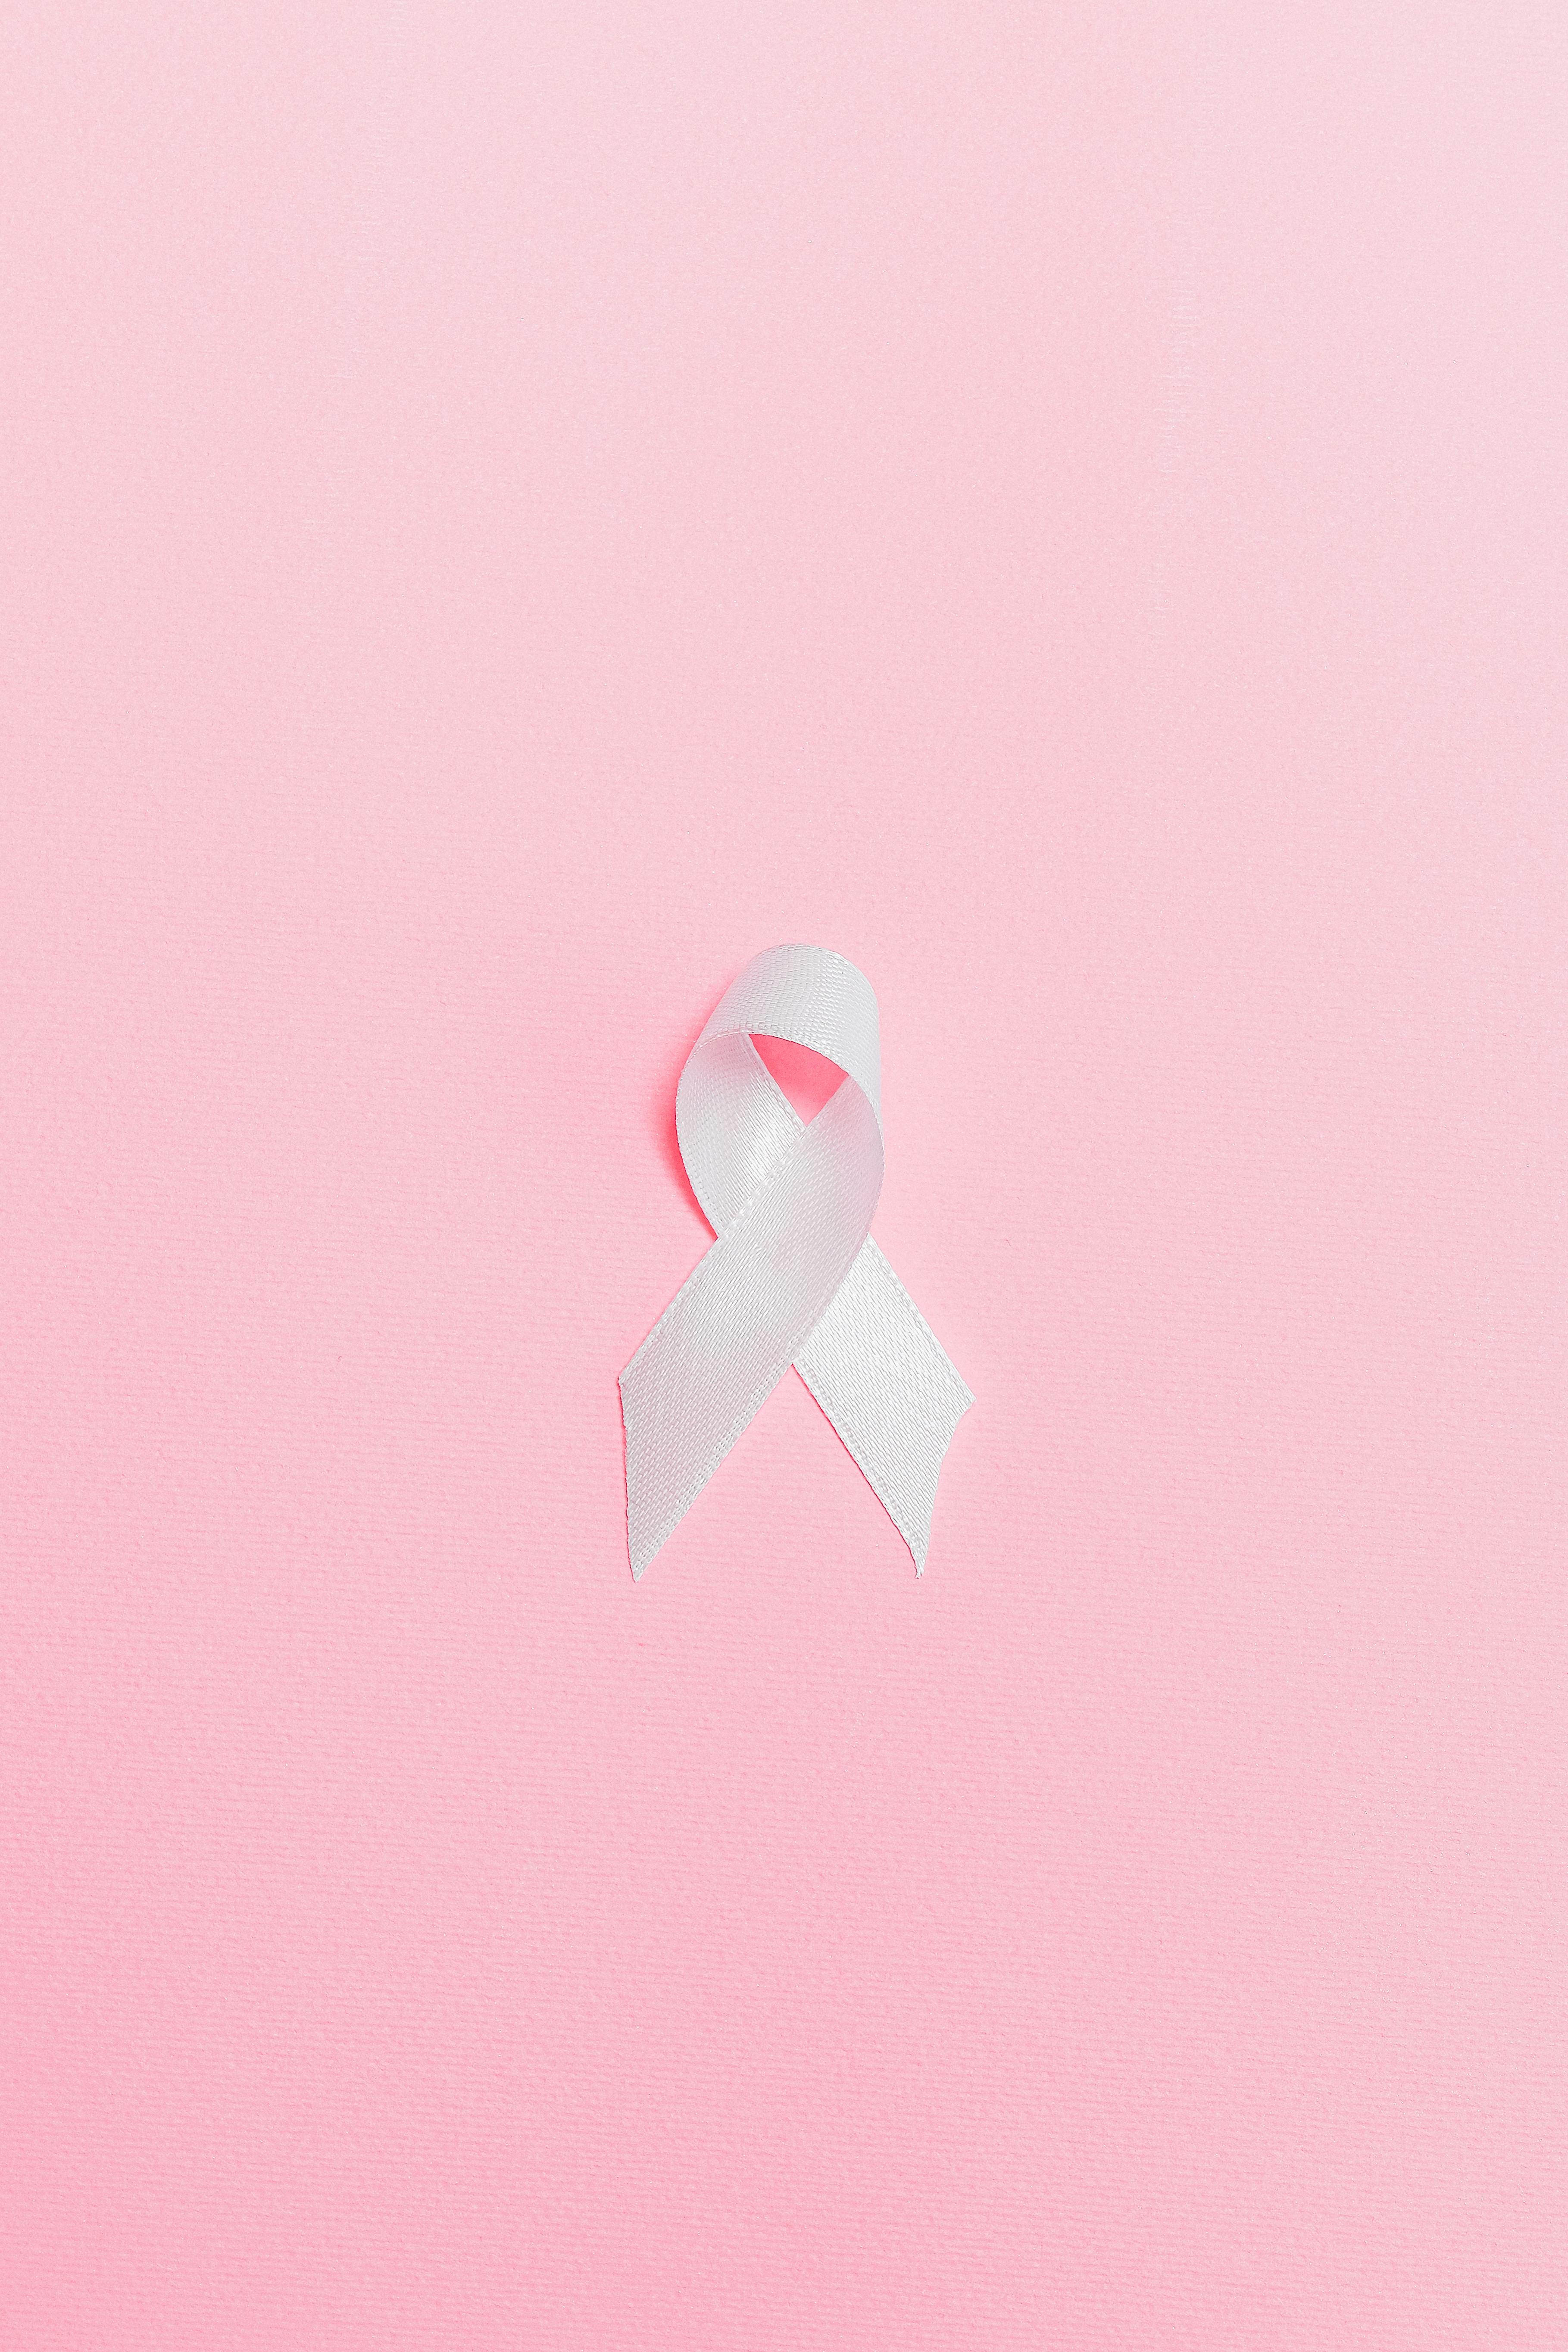 Cancer Wallpapers  Wallpaper Cave